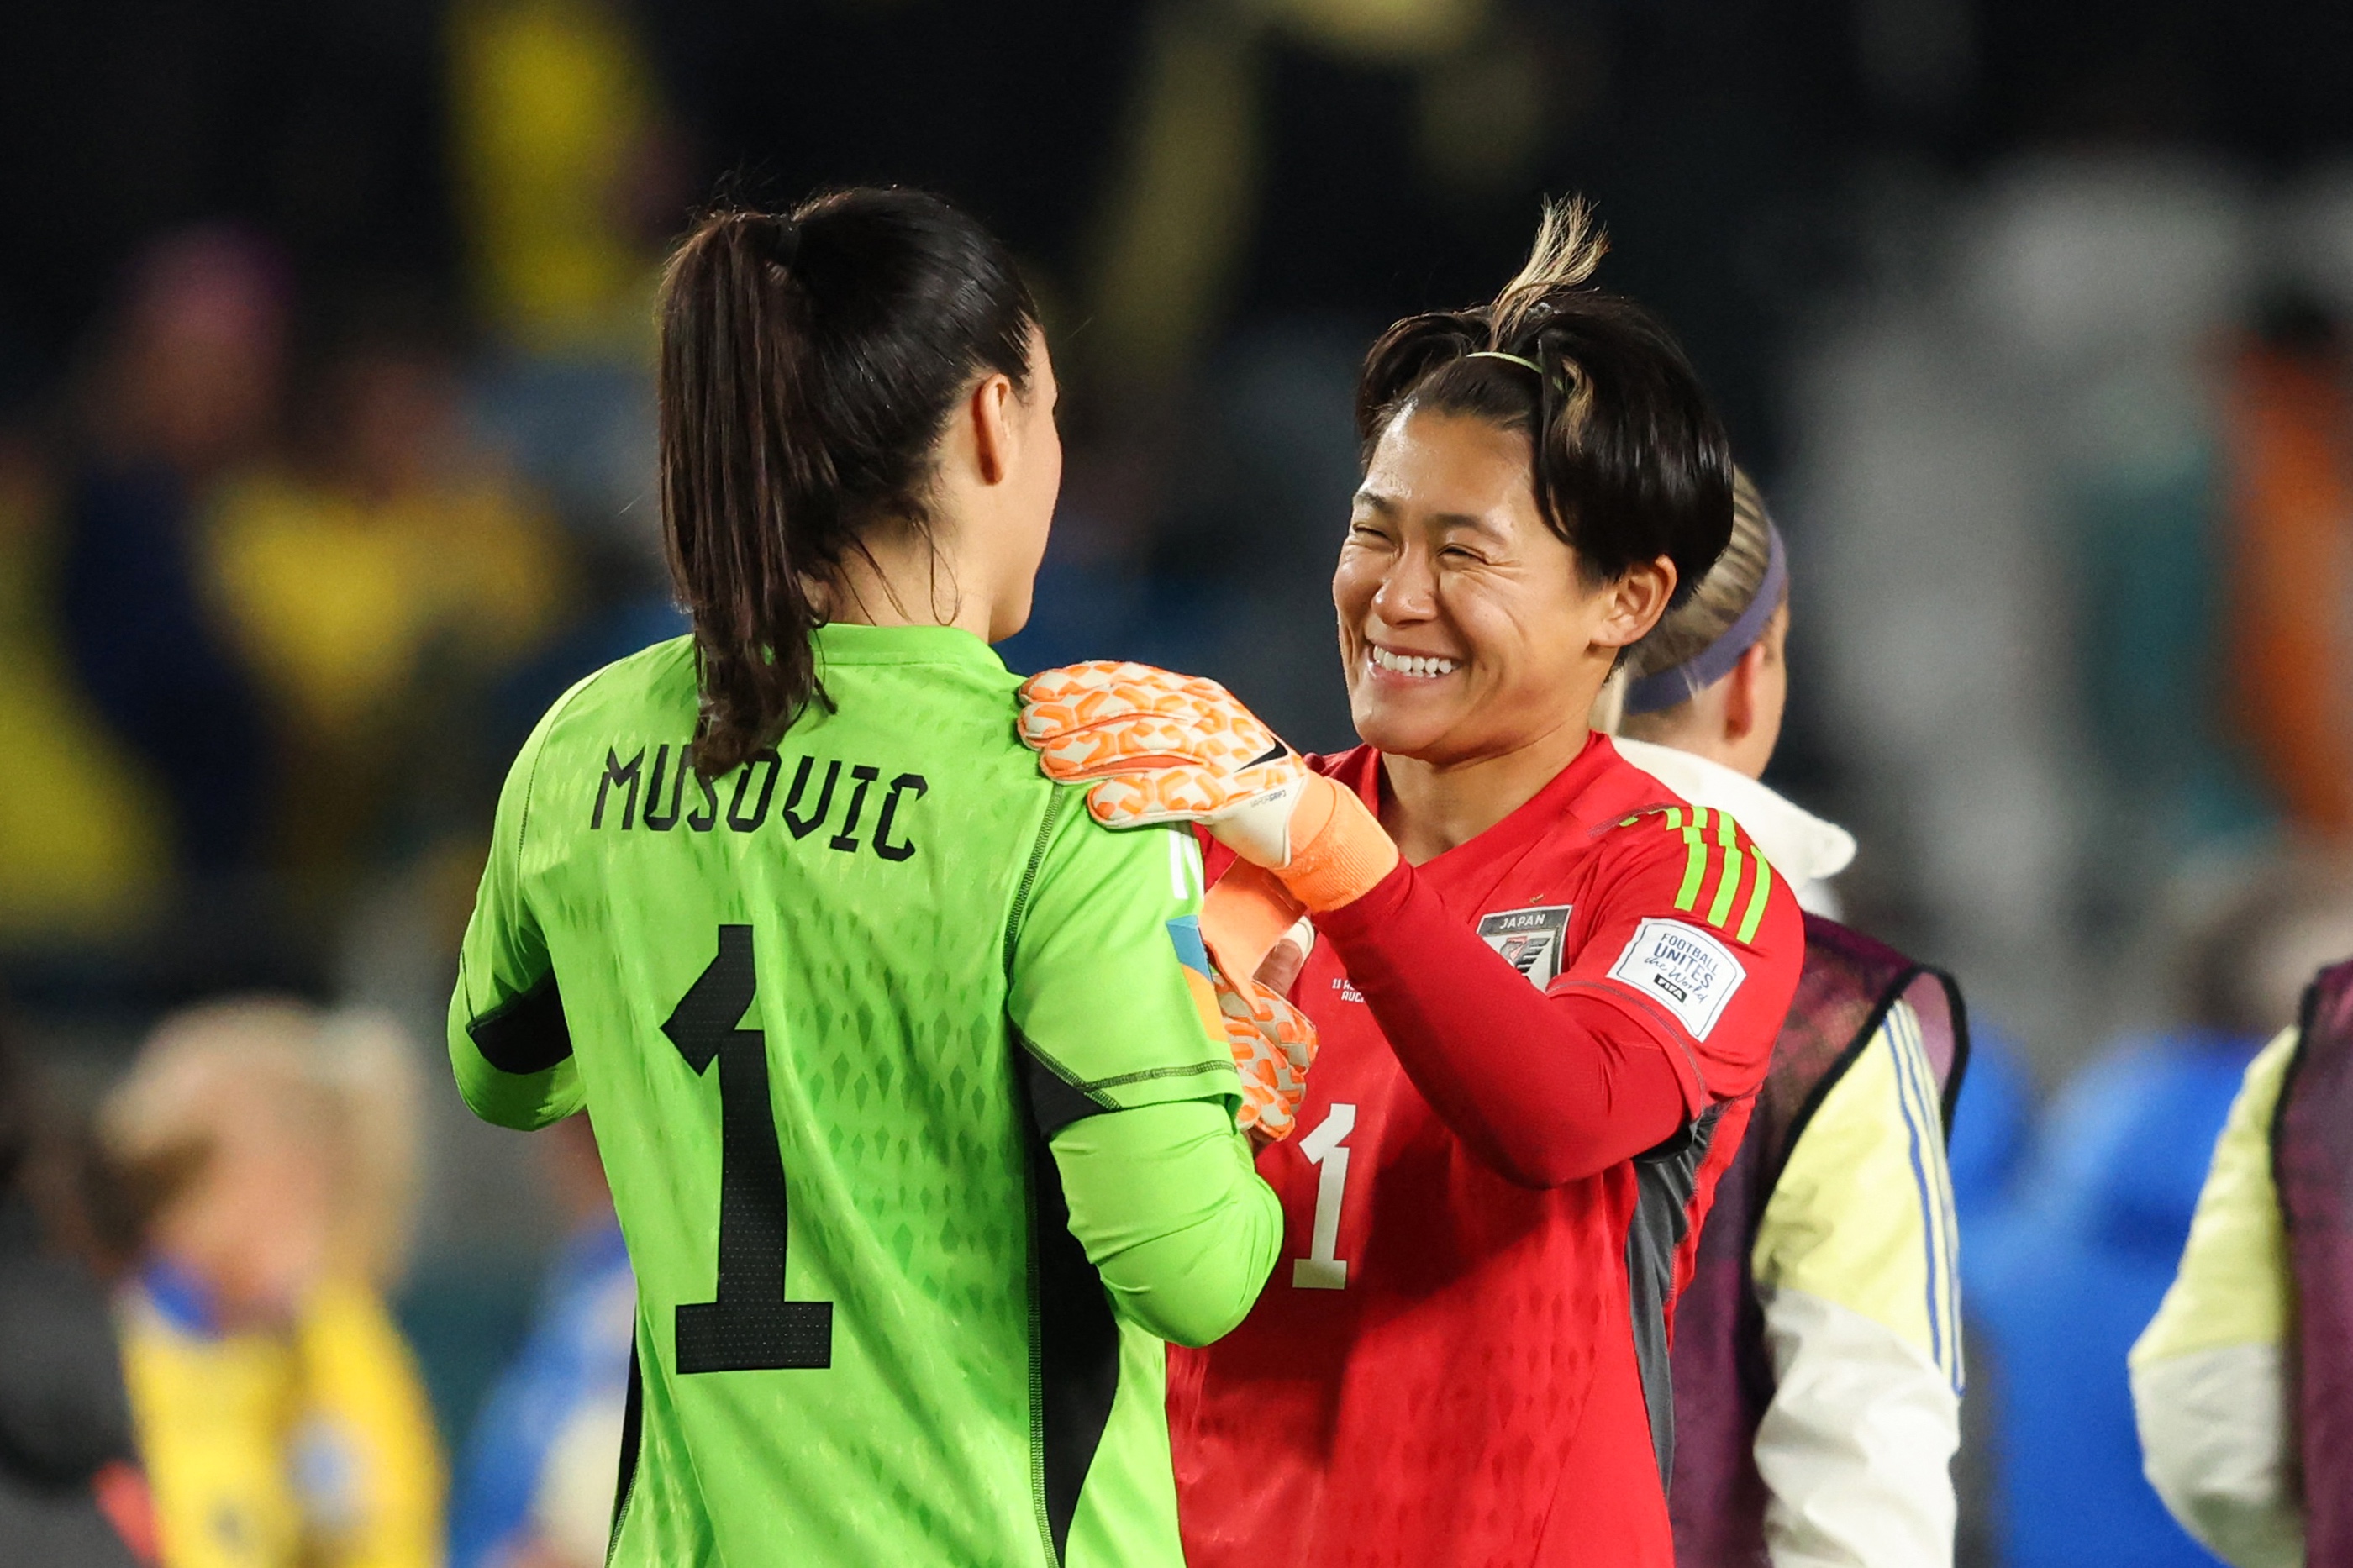 Japan and Sweden goal keepers shake hands post match